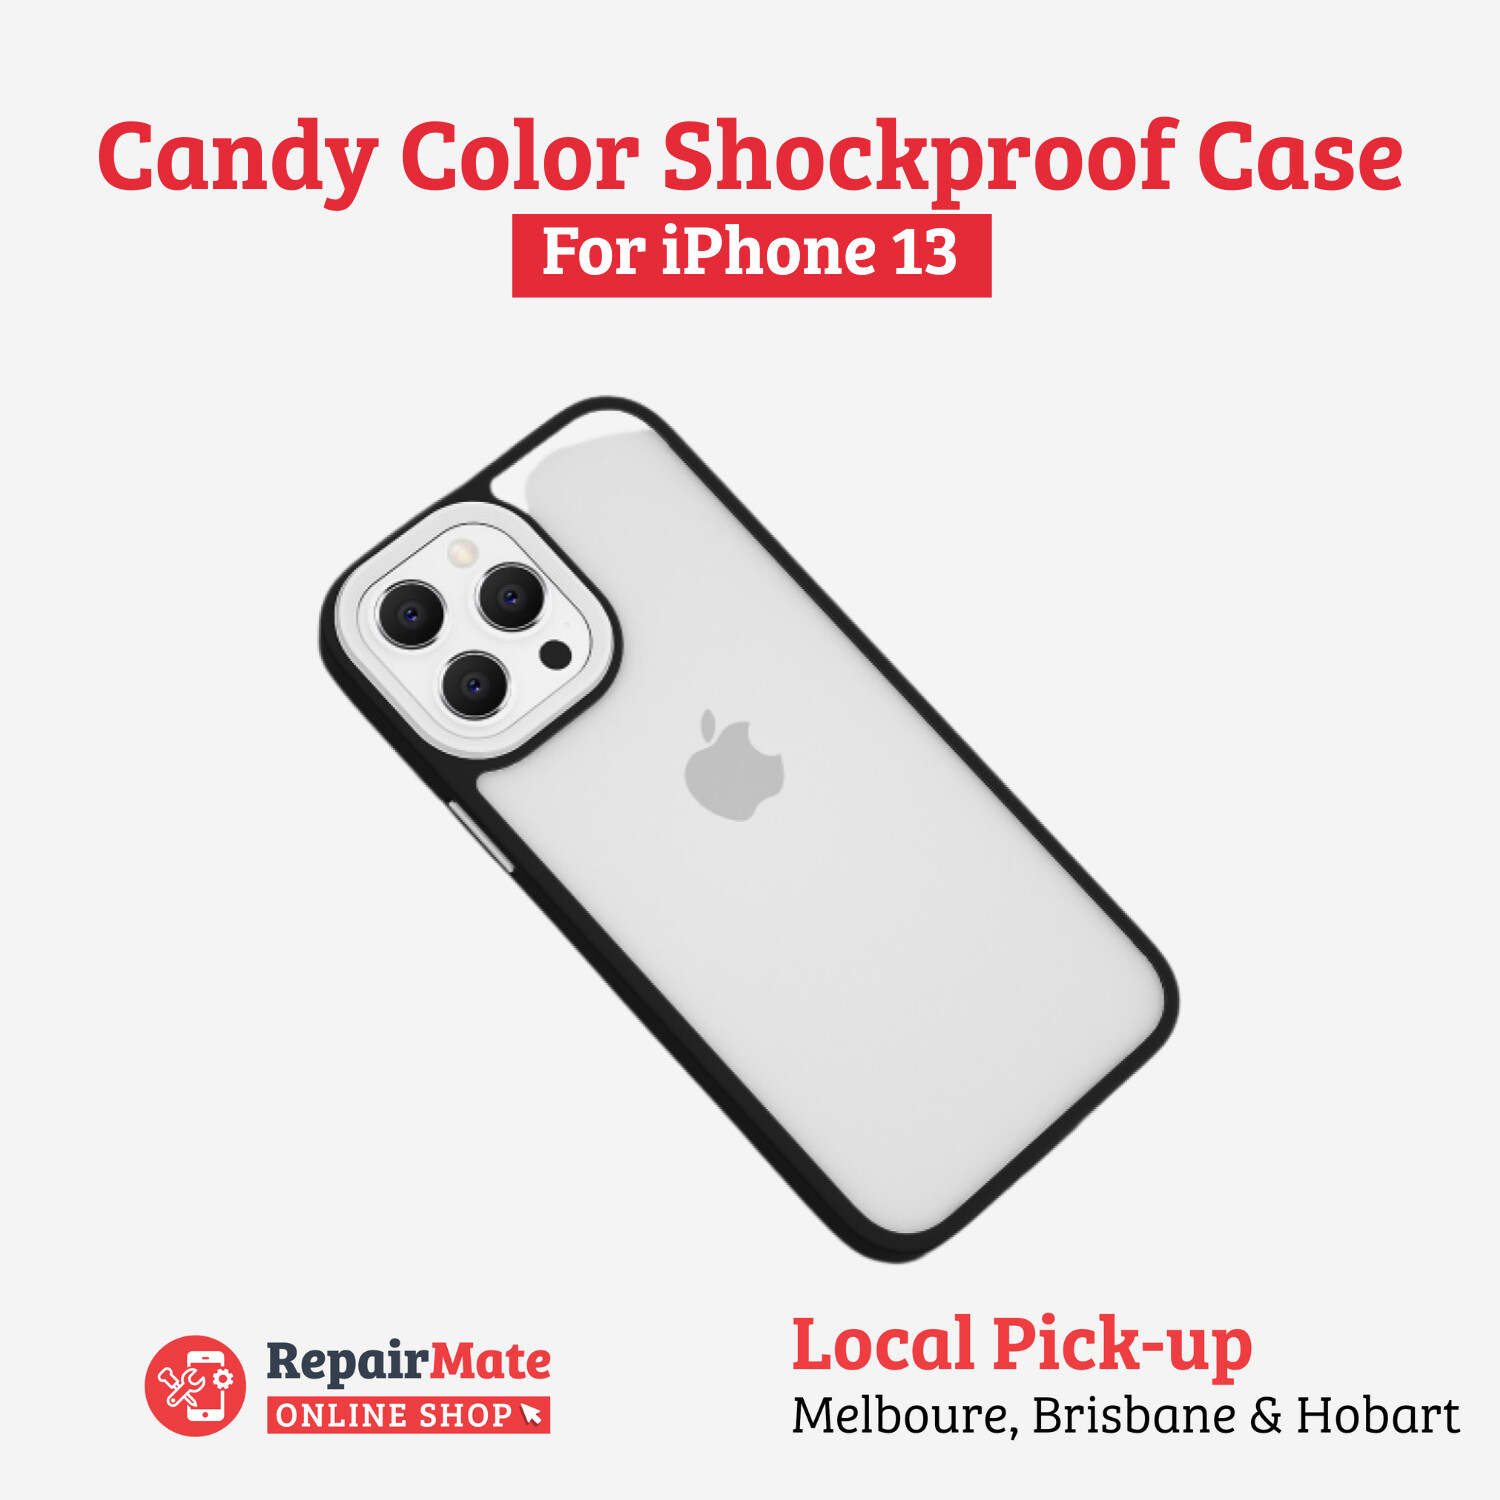 Candy Color Shockproof Case for iPhone 13